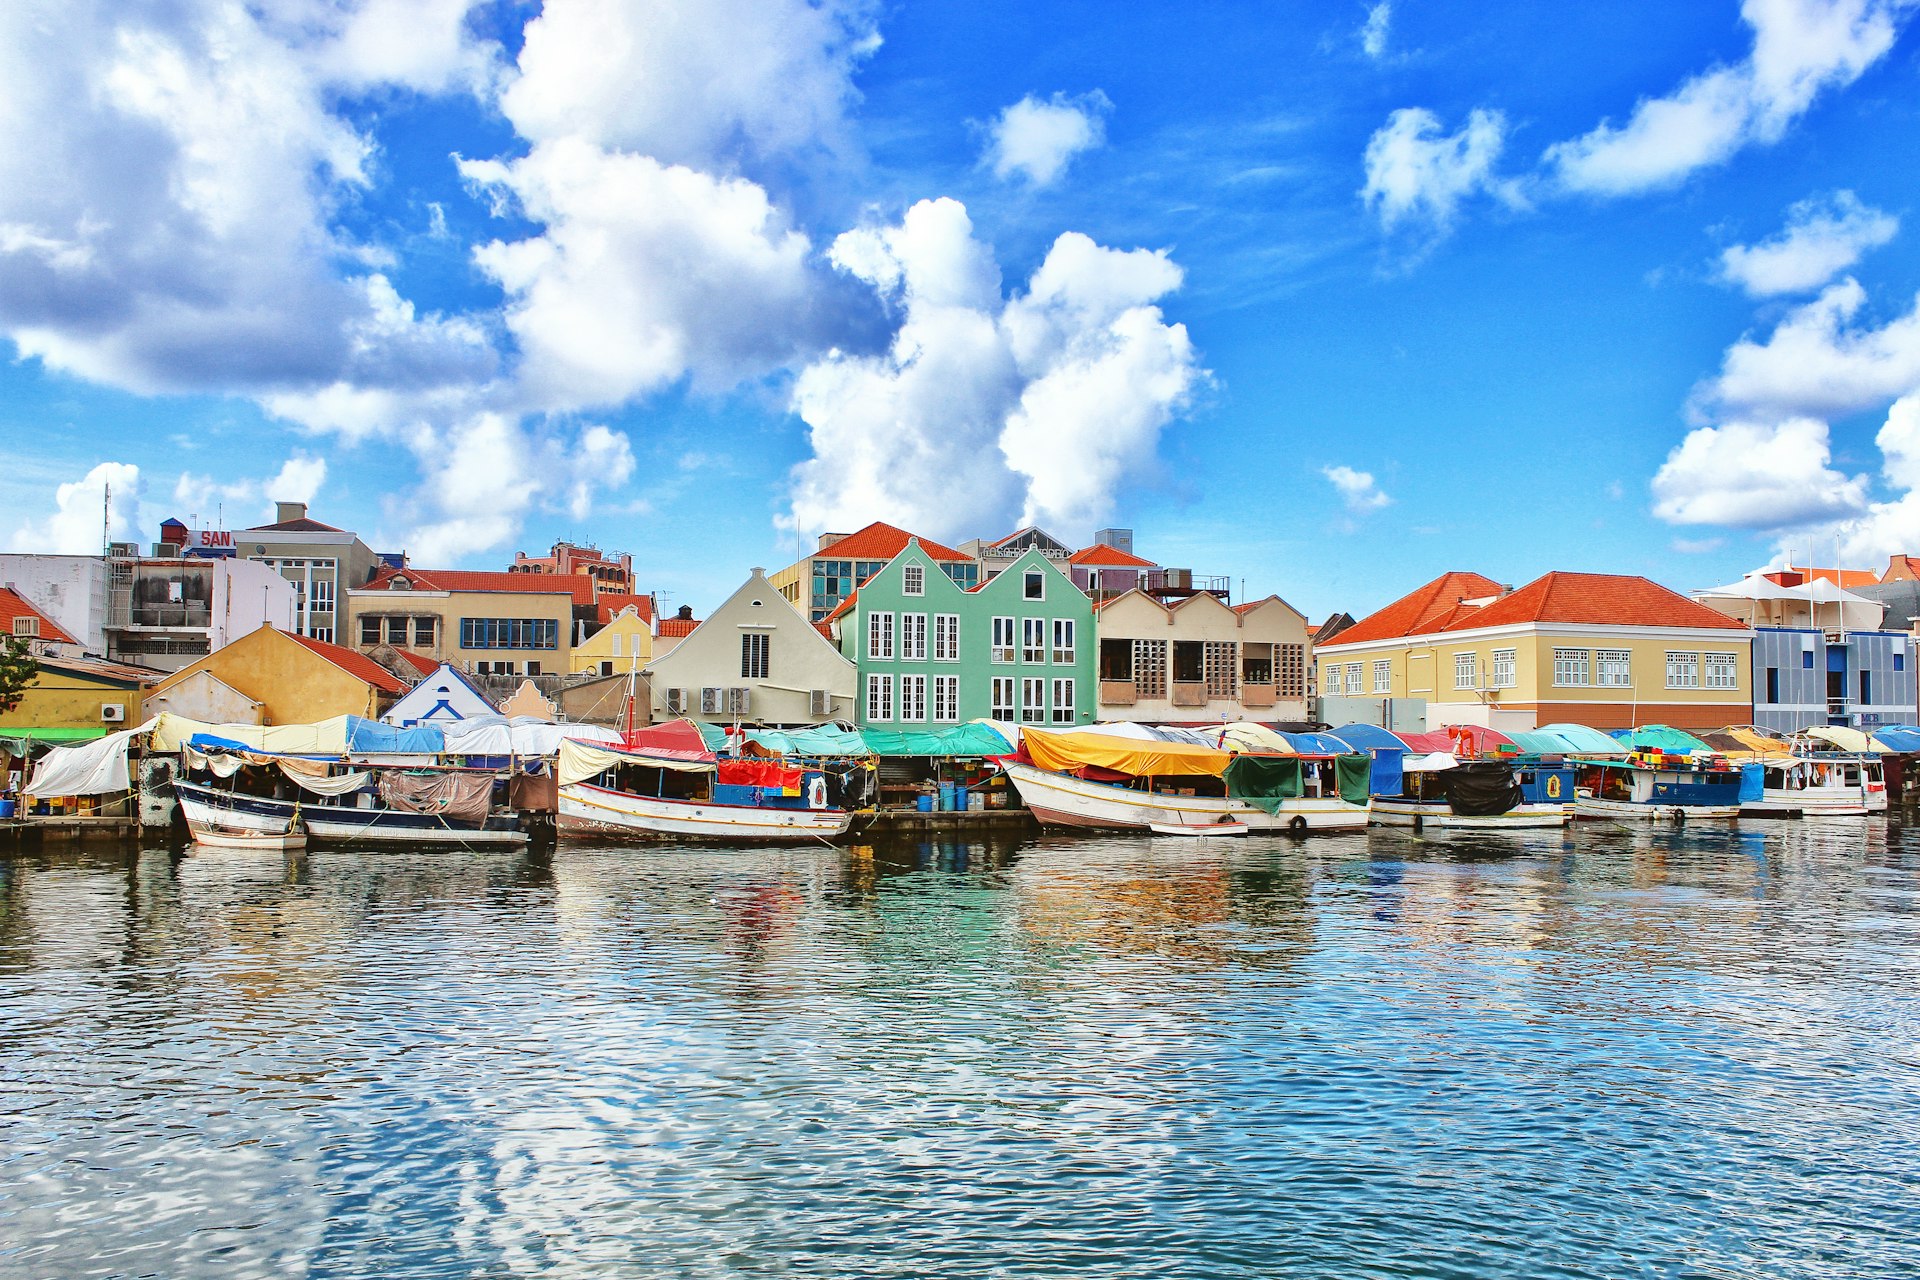 Boats on the water at the floating market in Willemstad, Curaçao